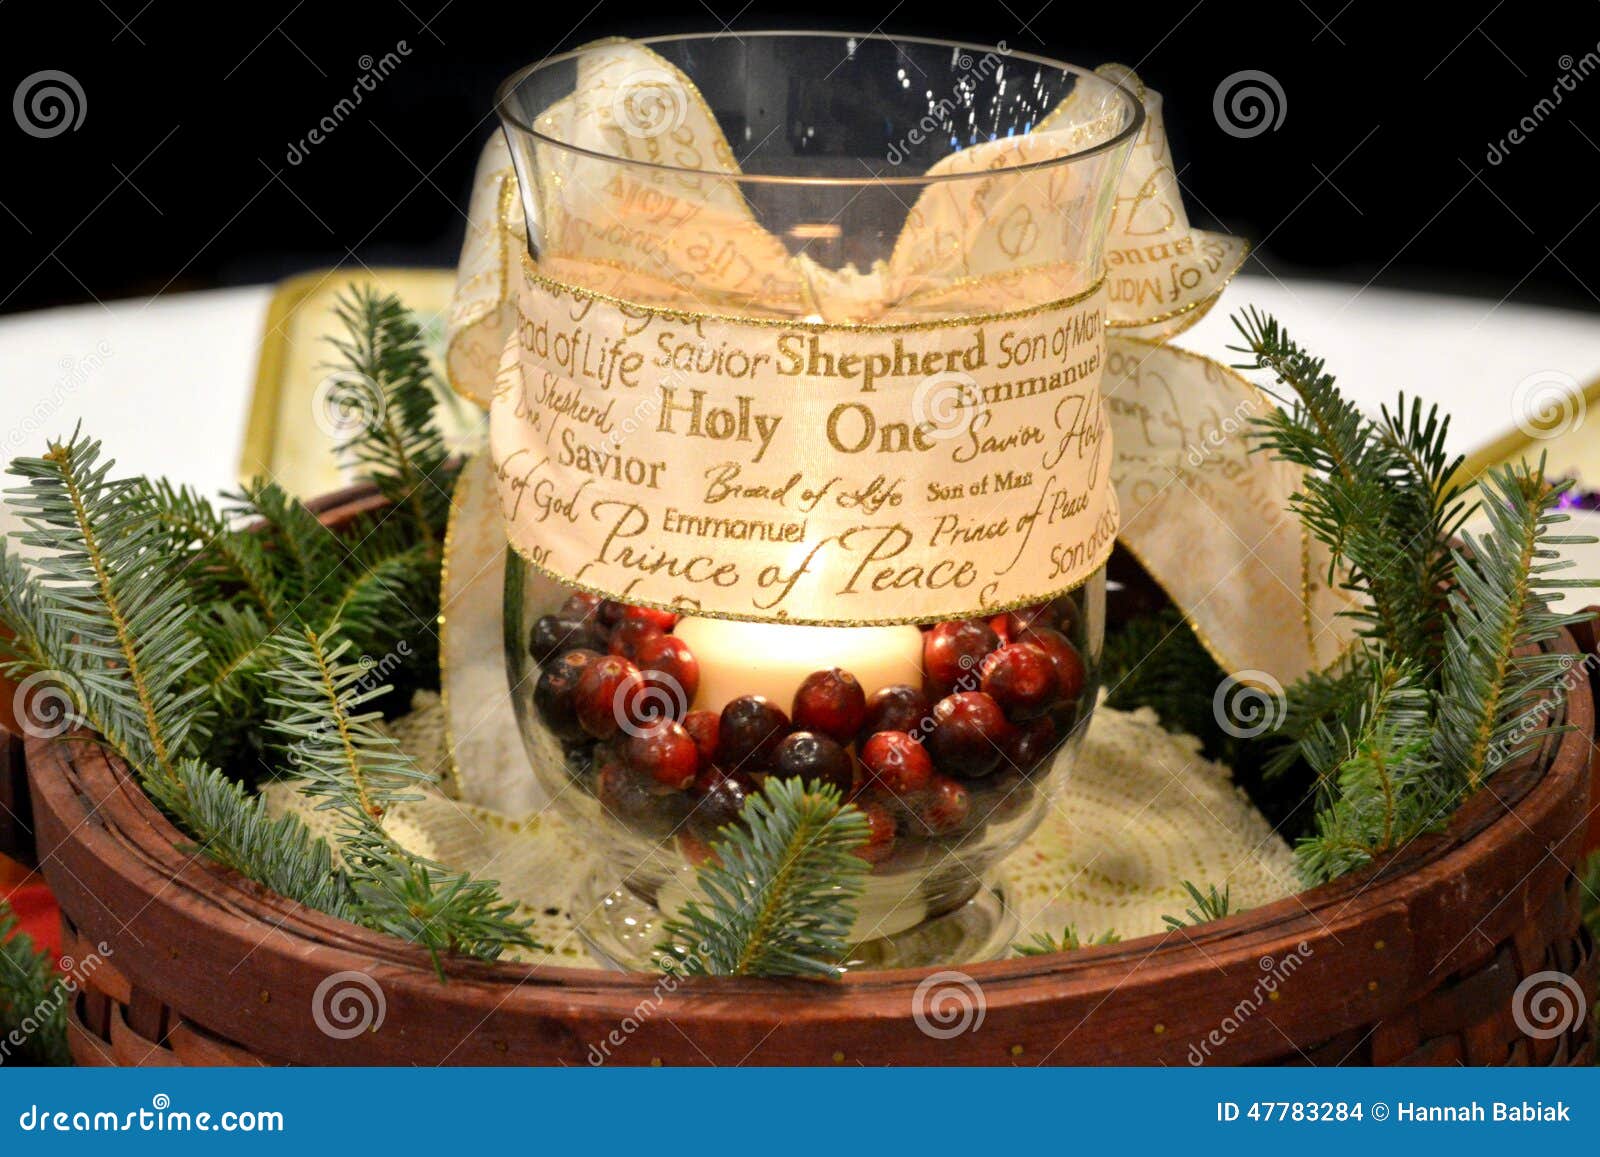 Image result for pretty Christmas candle arrangement